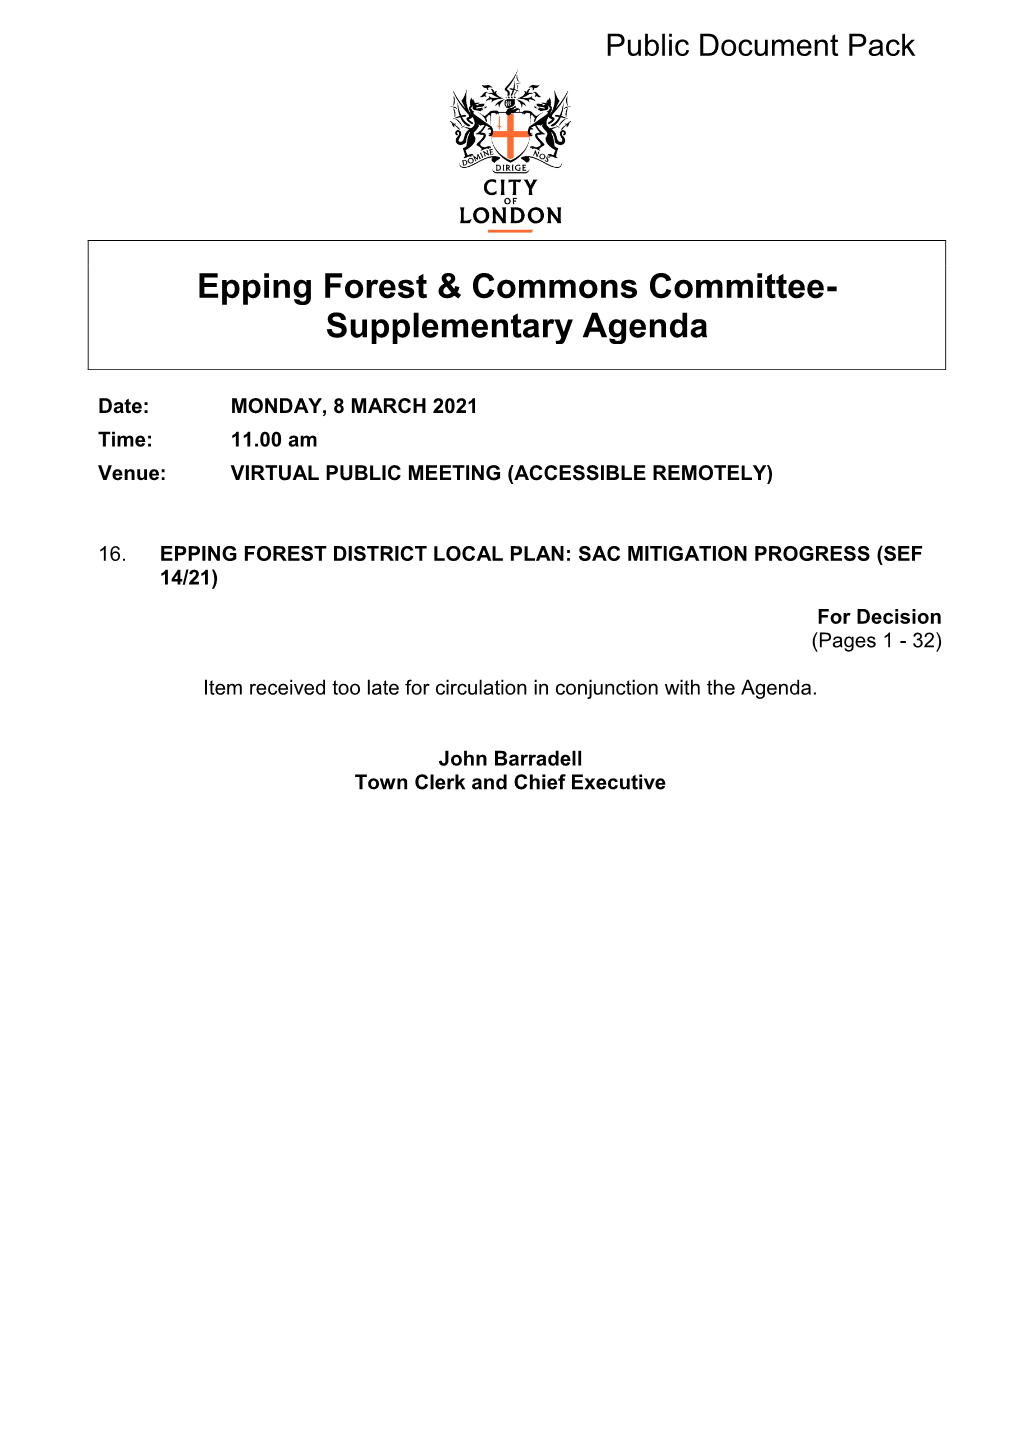 Epping Foret and Commons Committee Supplementary Agenda